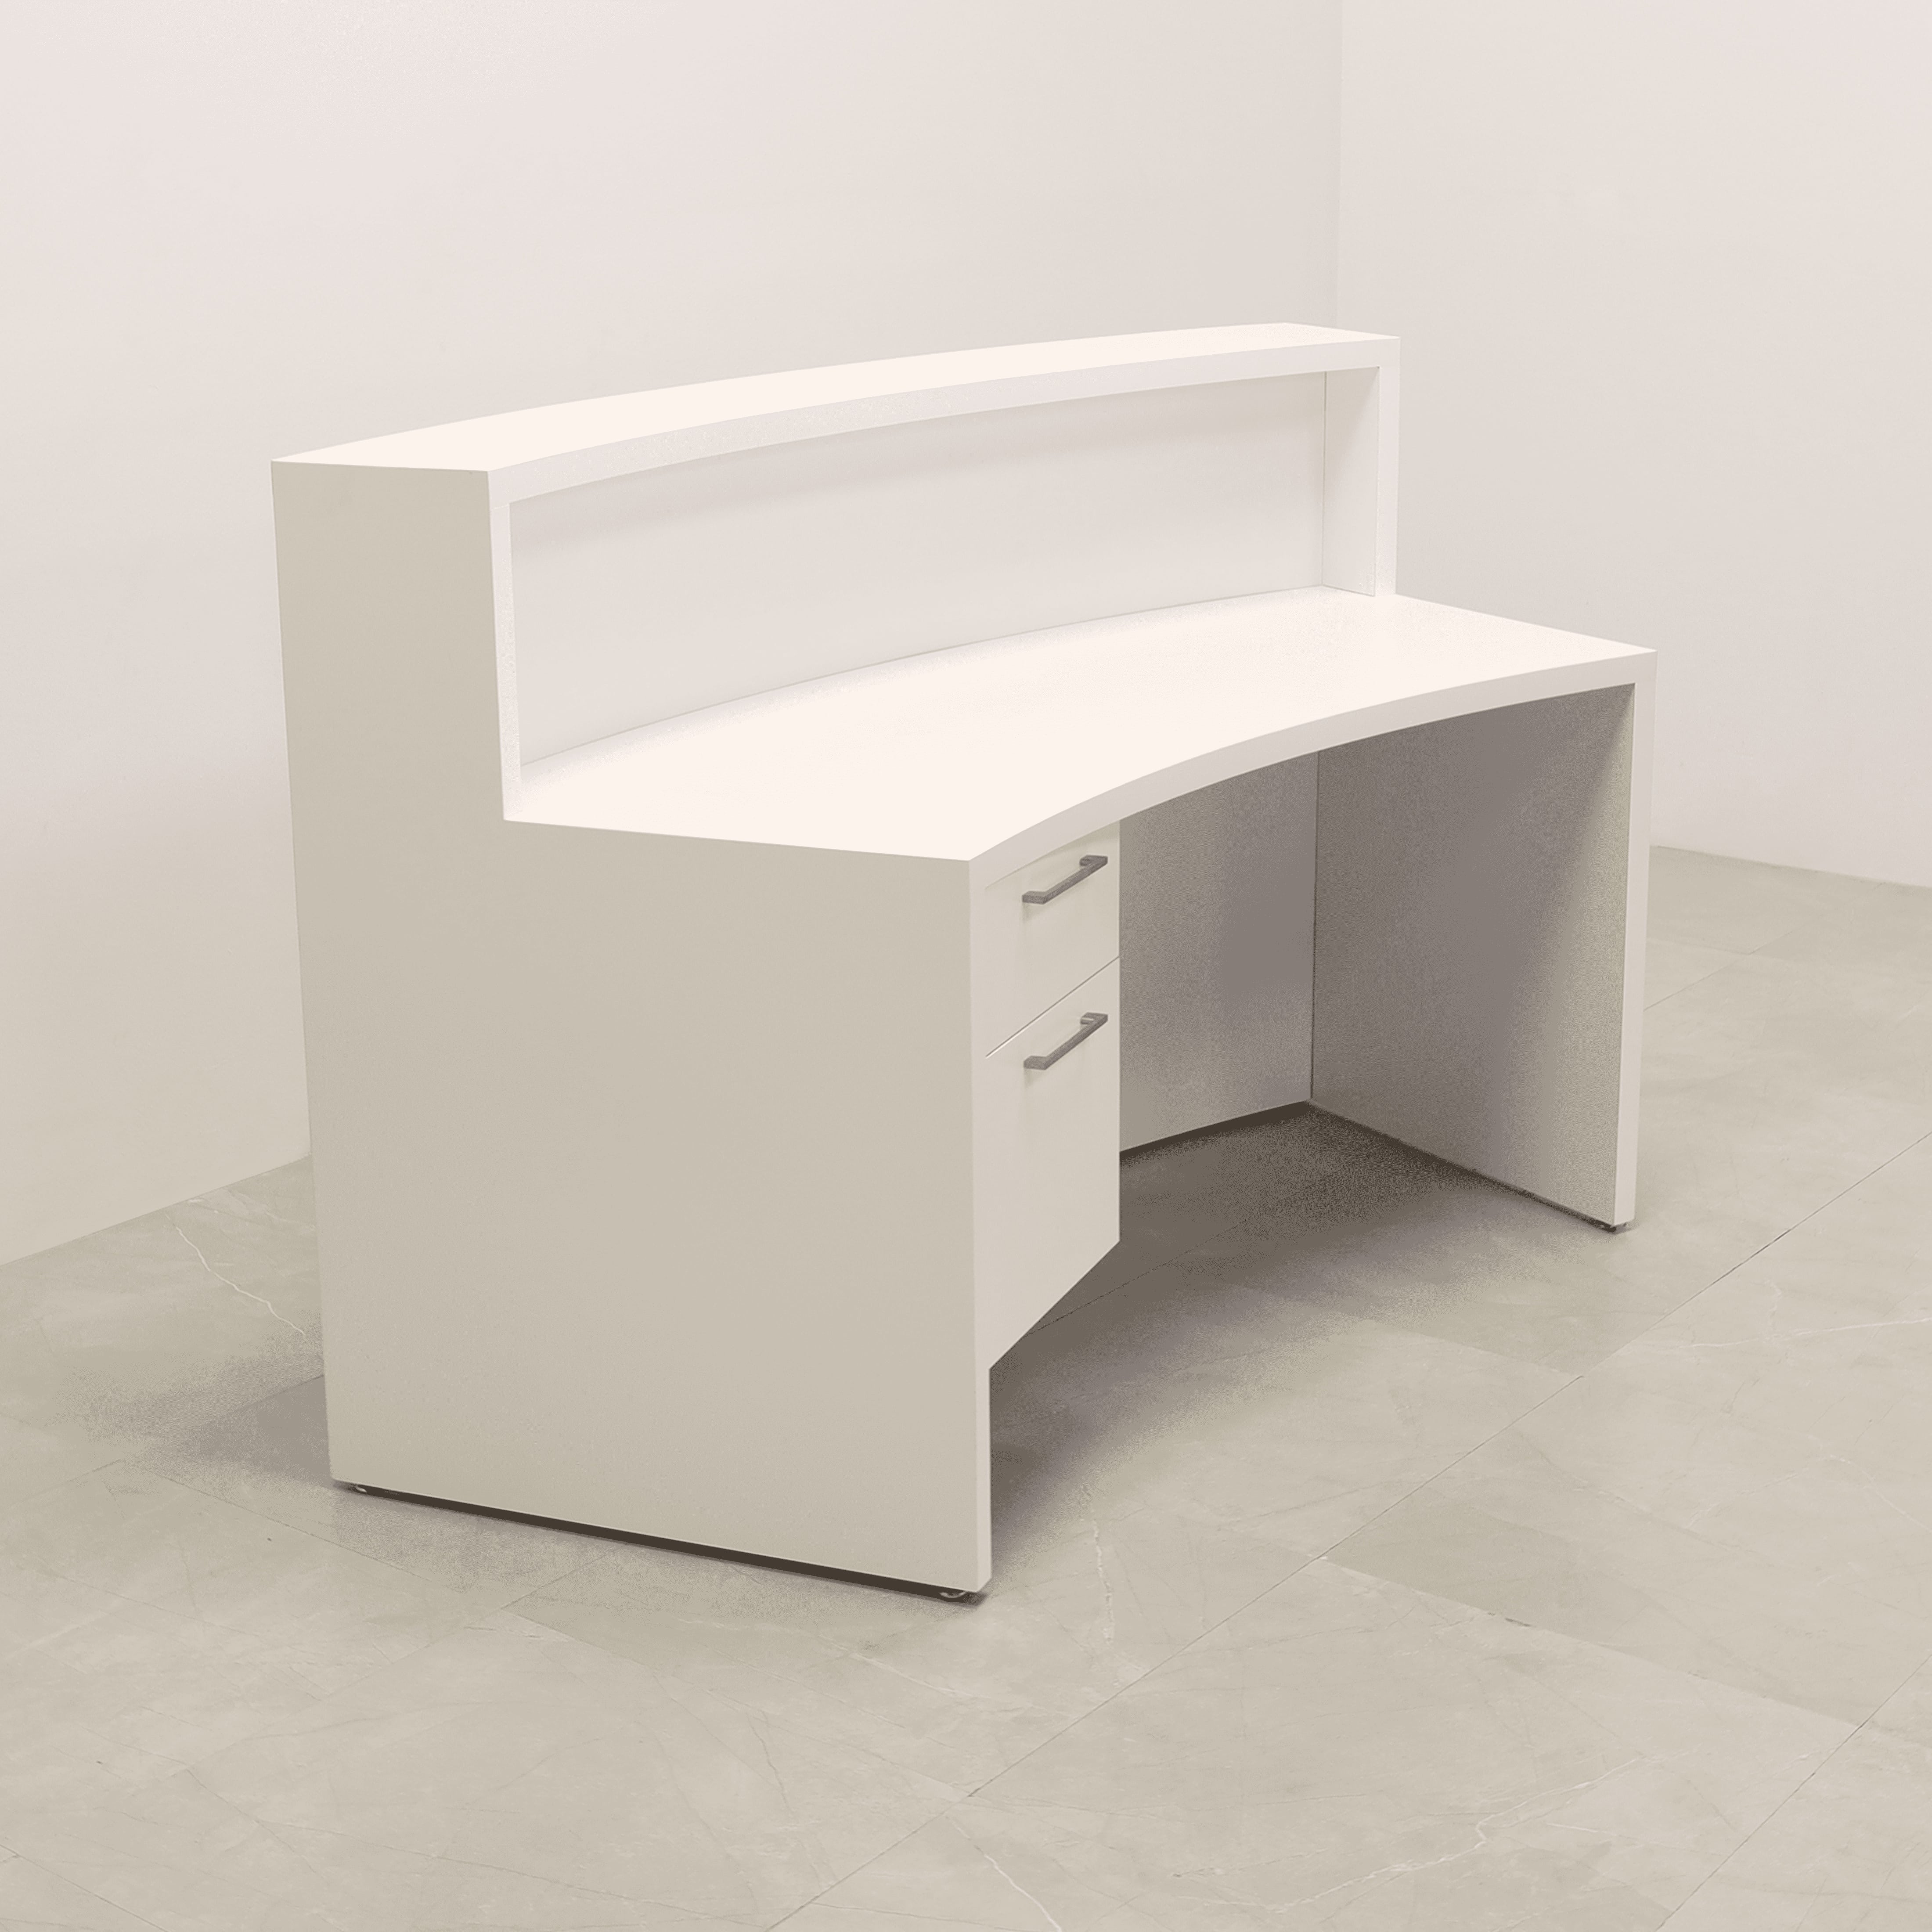 72-inch Seattle X1 Custom Reception Desk in white matte laminate desk and curved front panel, with warm white LED, shown here.